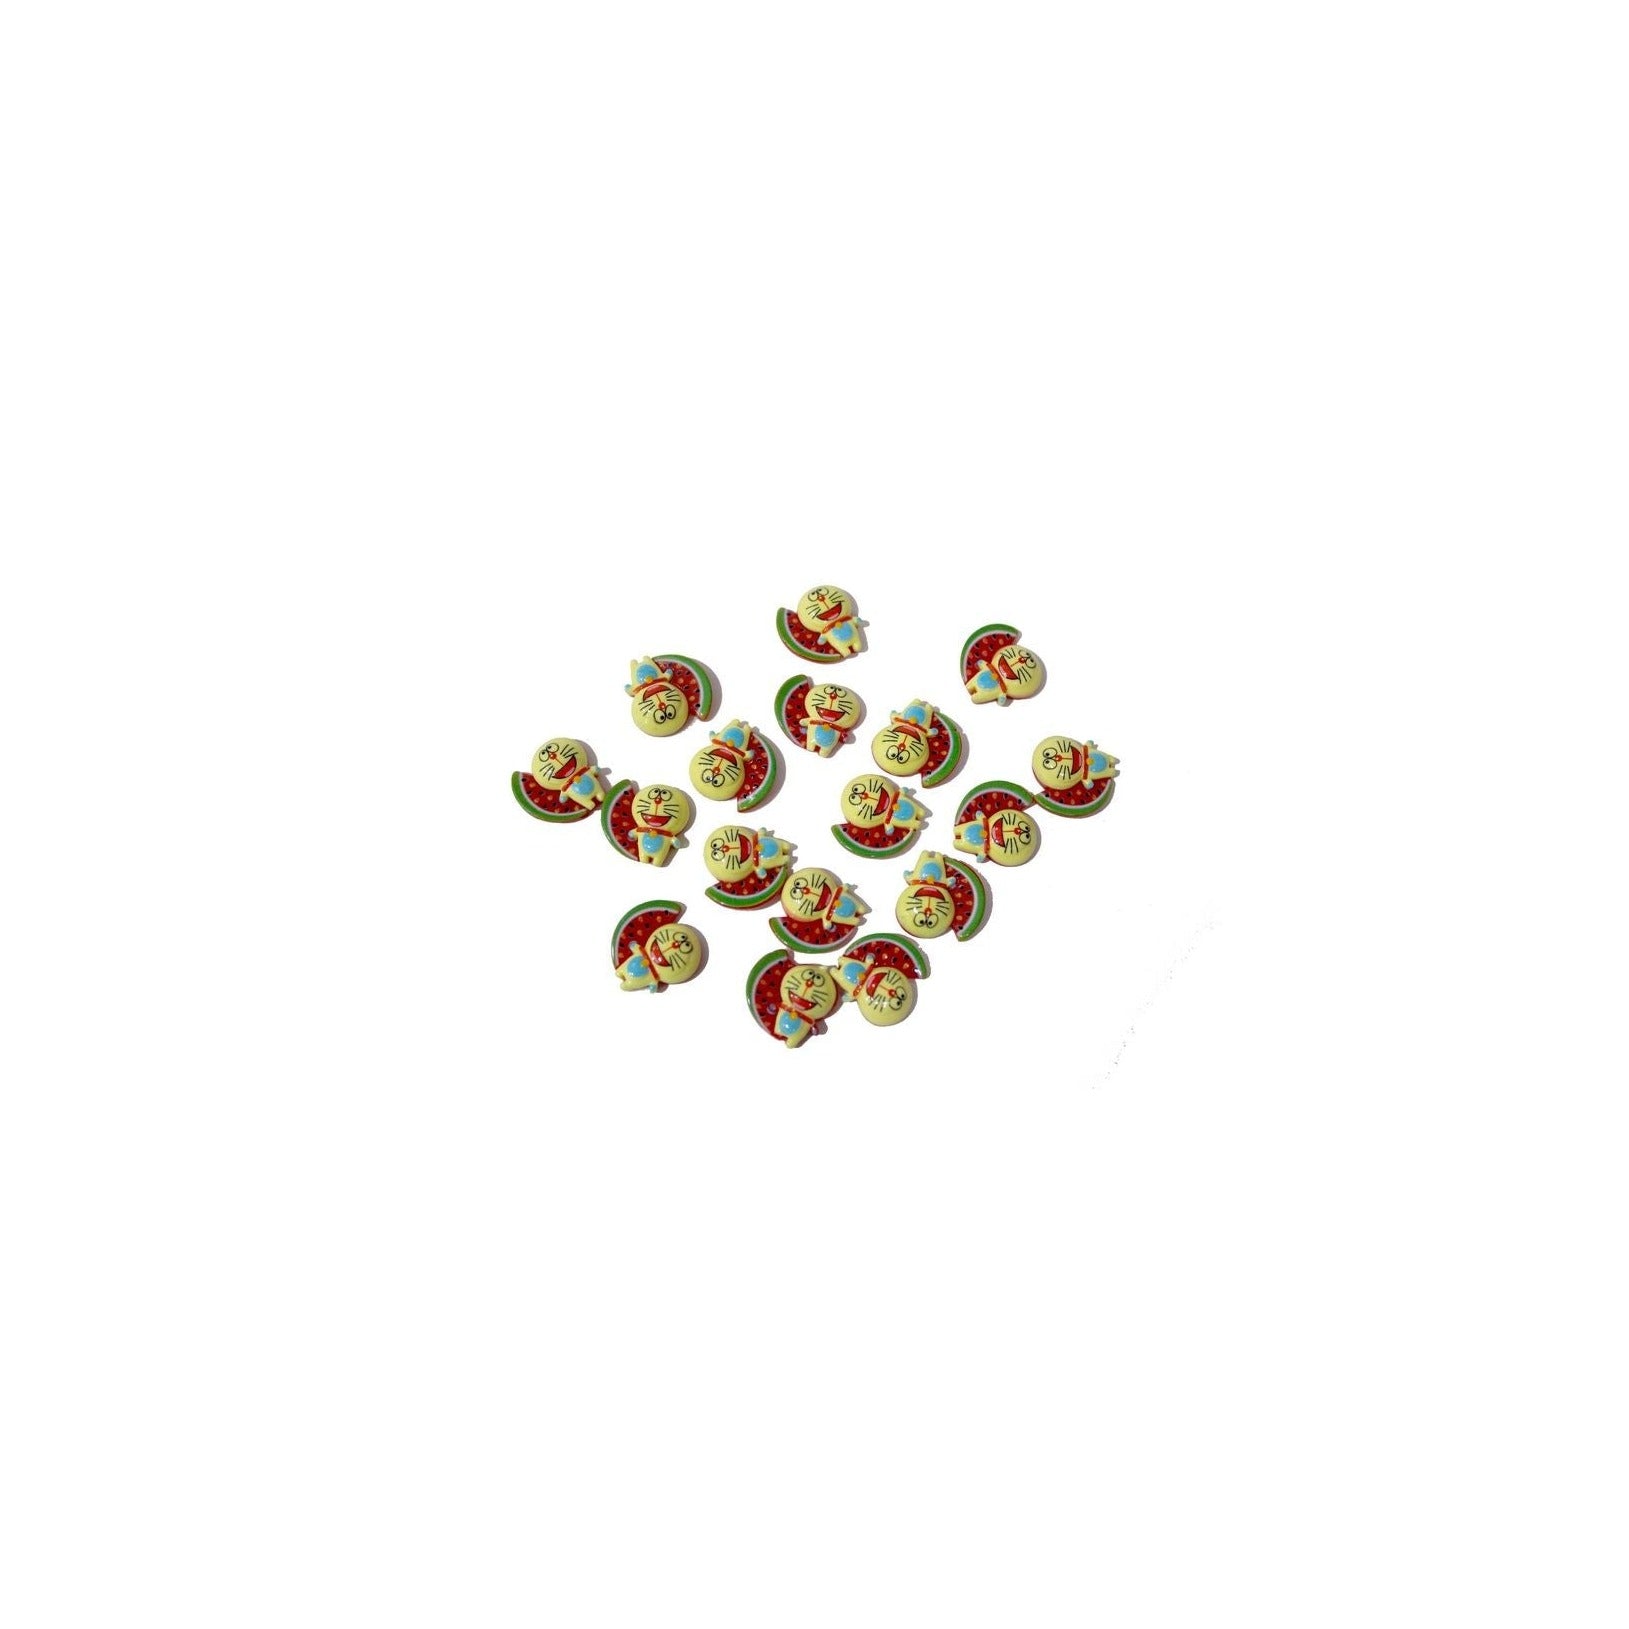 Indian Petals Resin Acrylic Doraemon with Watermelon Motif for Jewelry Craft or Decoration - 11594, Red